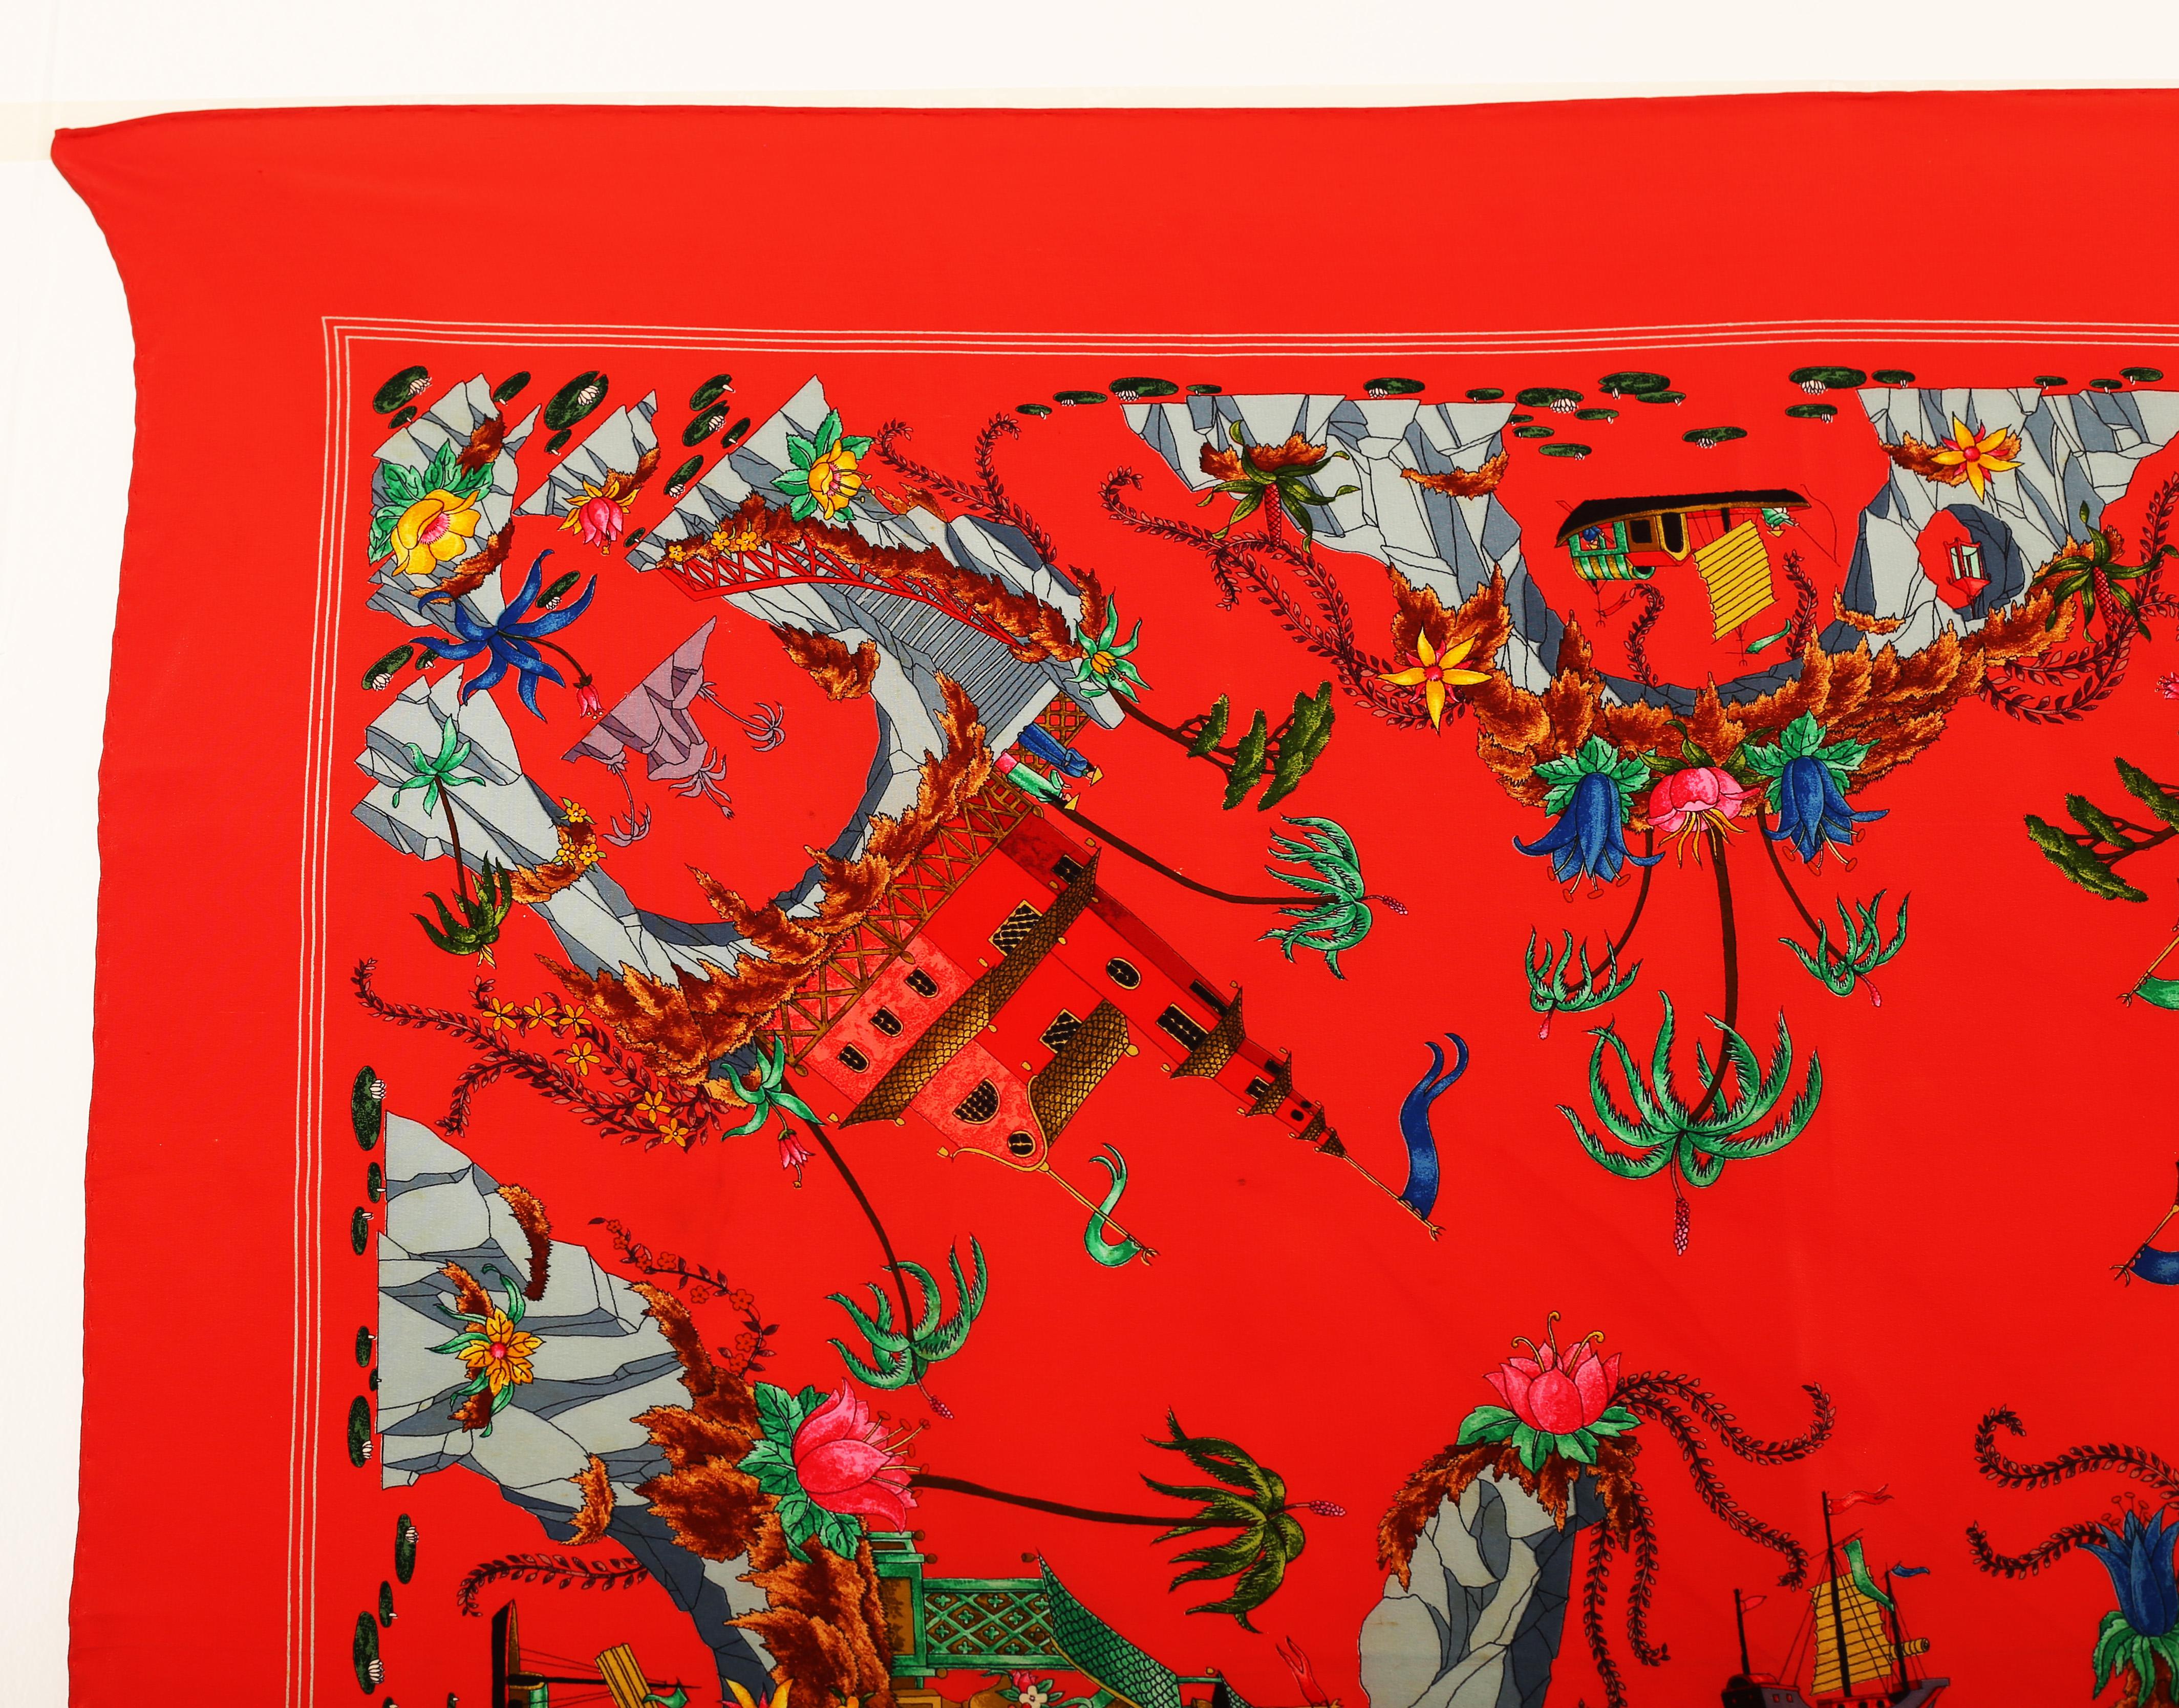 Italian illustrator Vittorio Accornero designed some iconic scarves for Gucci in the late 60s and 70s, and the label’s throwing back to those designs in its latest collection. The usual big branding is stripped back to a single corner on this silk